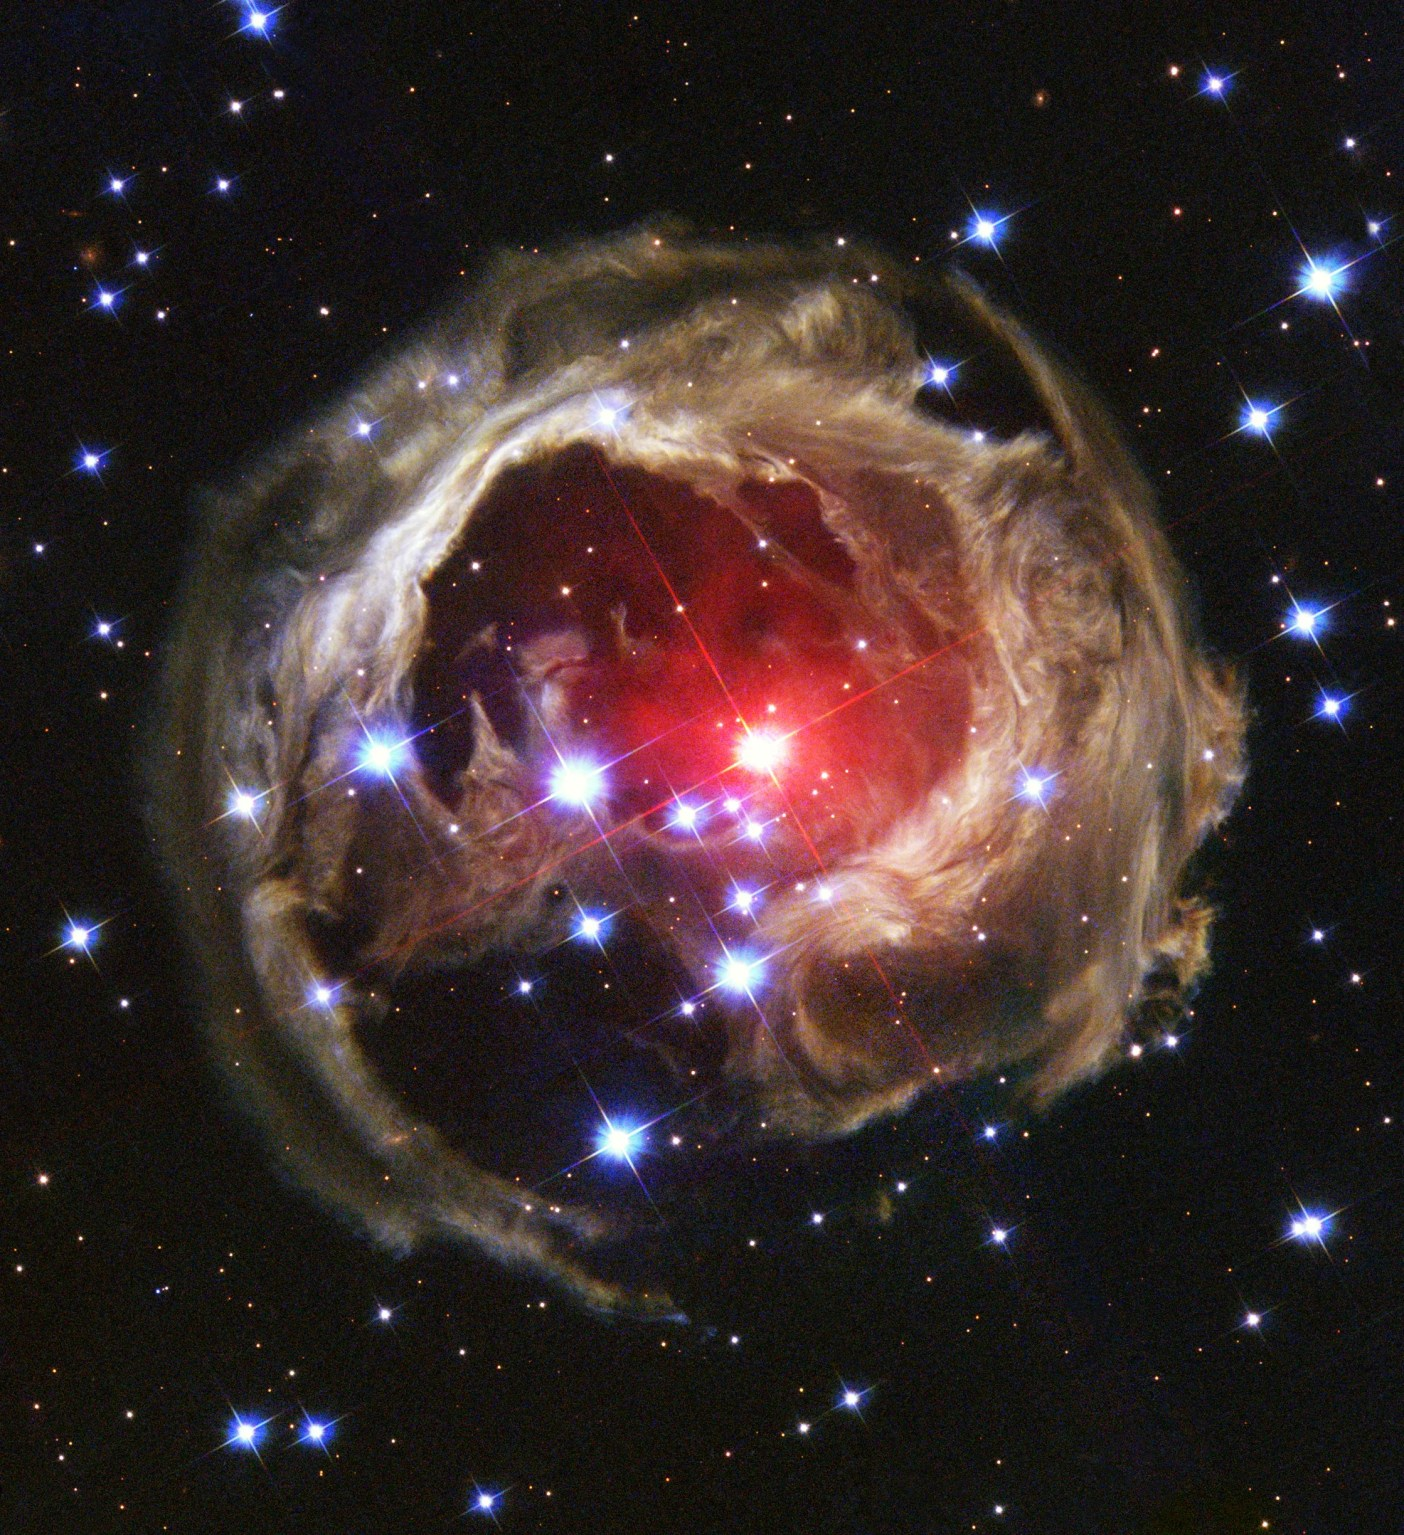 Hubble view of an expanding halo of light around star v838 monocerotis